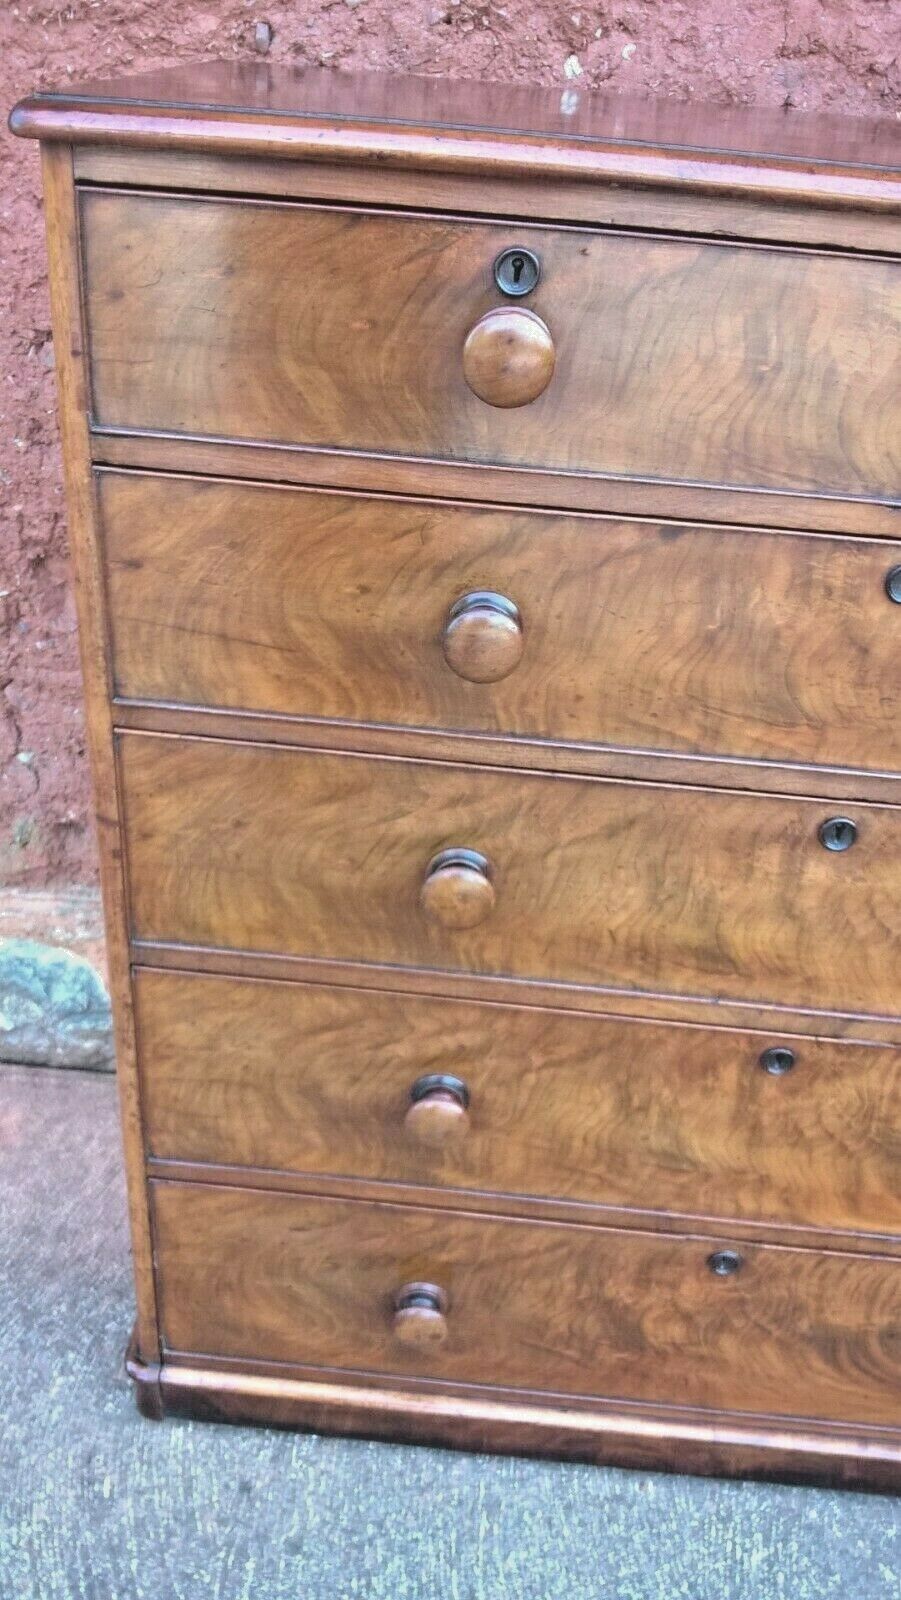 Good Quality Flame Mahogany Chest Antique Chest Drawers